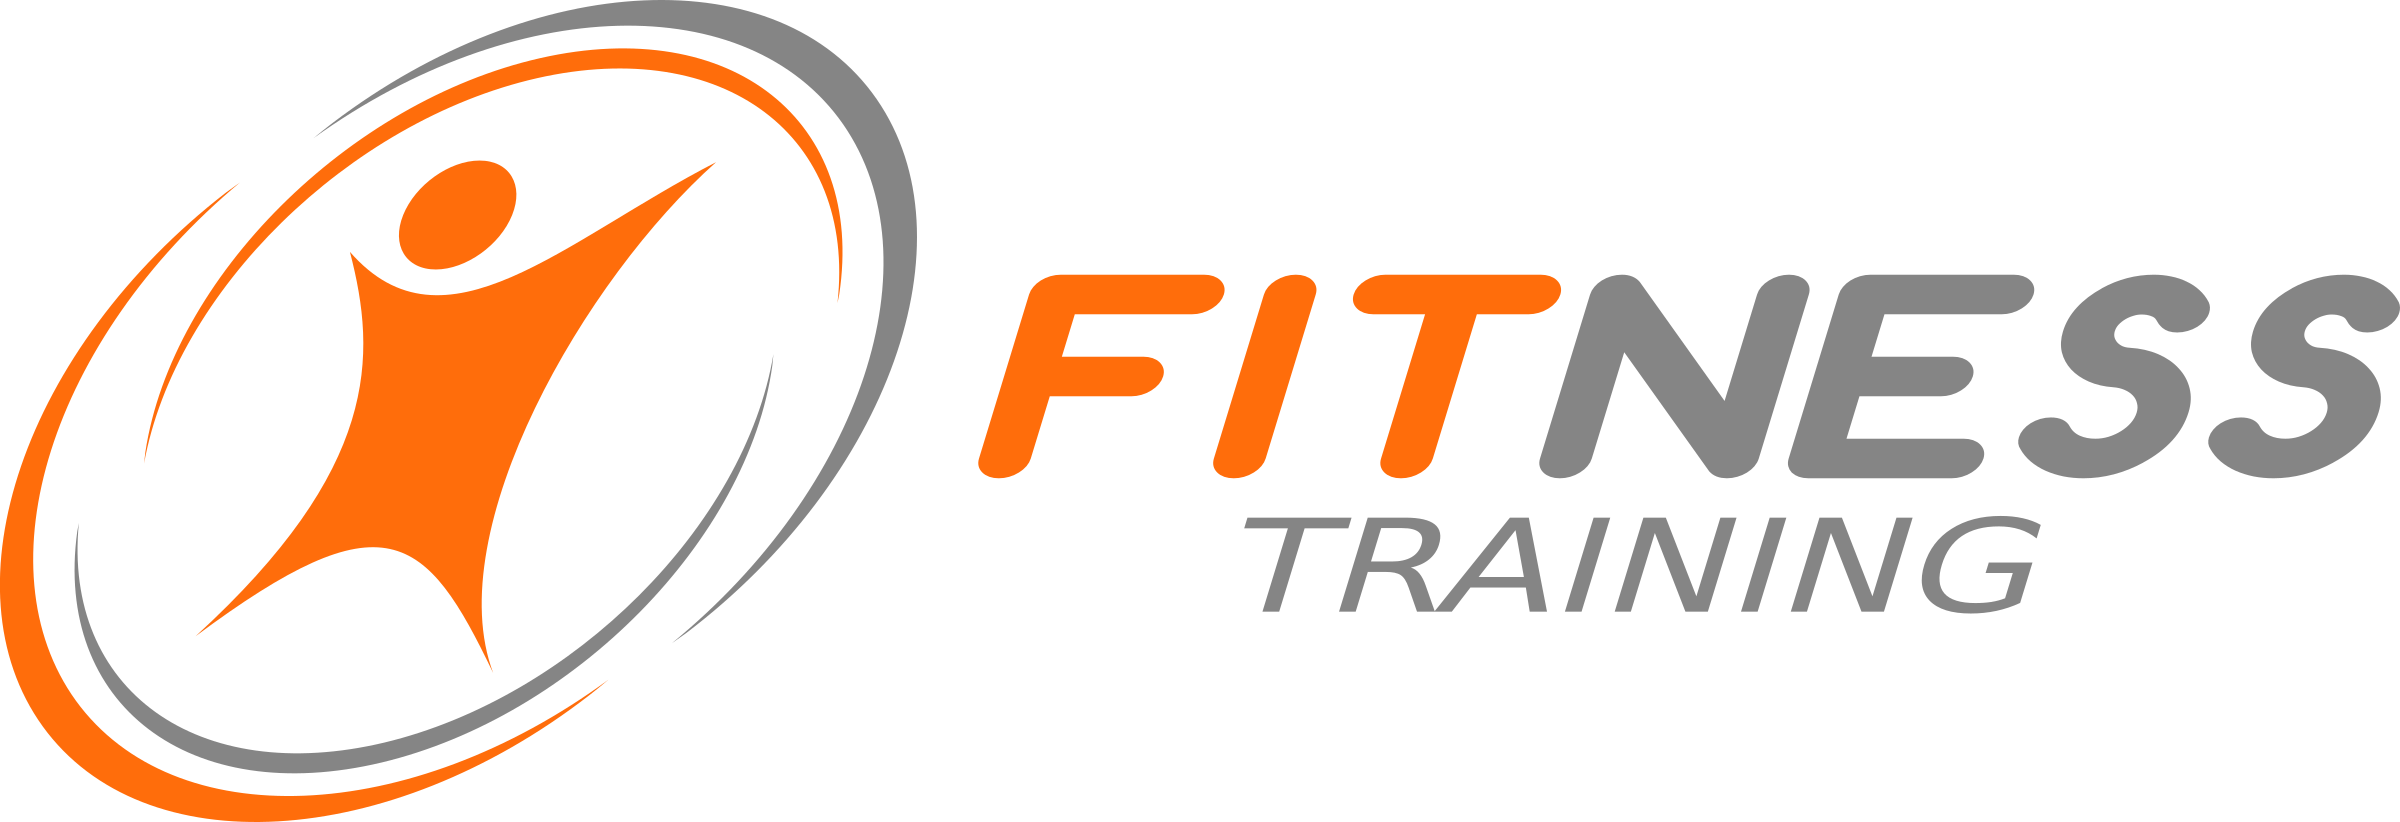 Fitness clipart colorful. Logo by donchico template